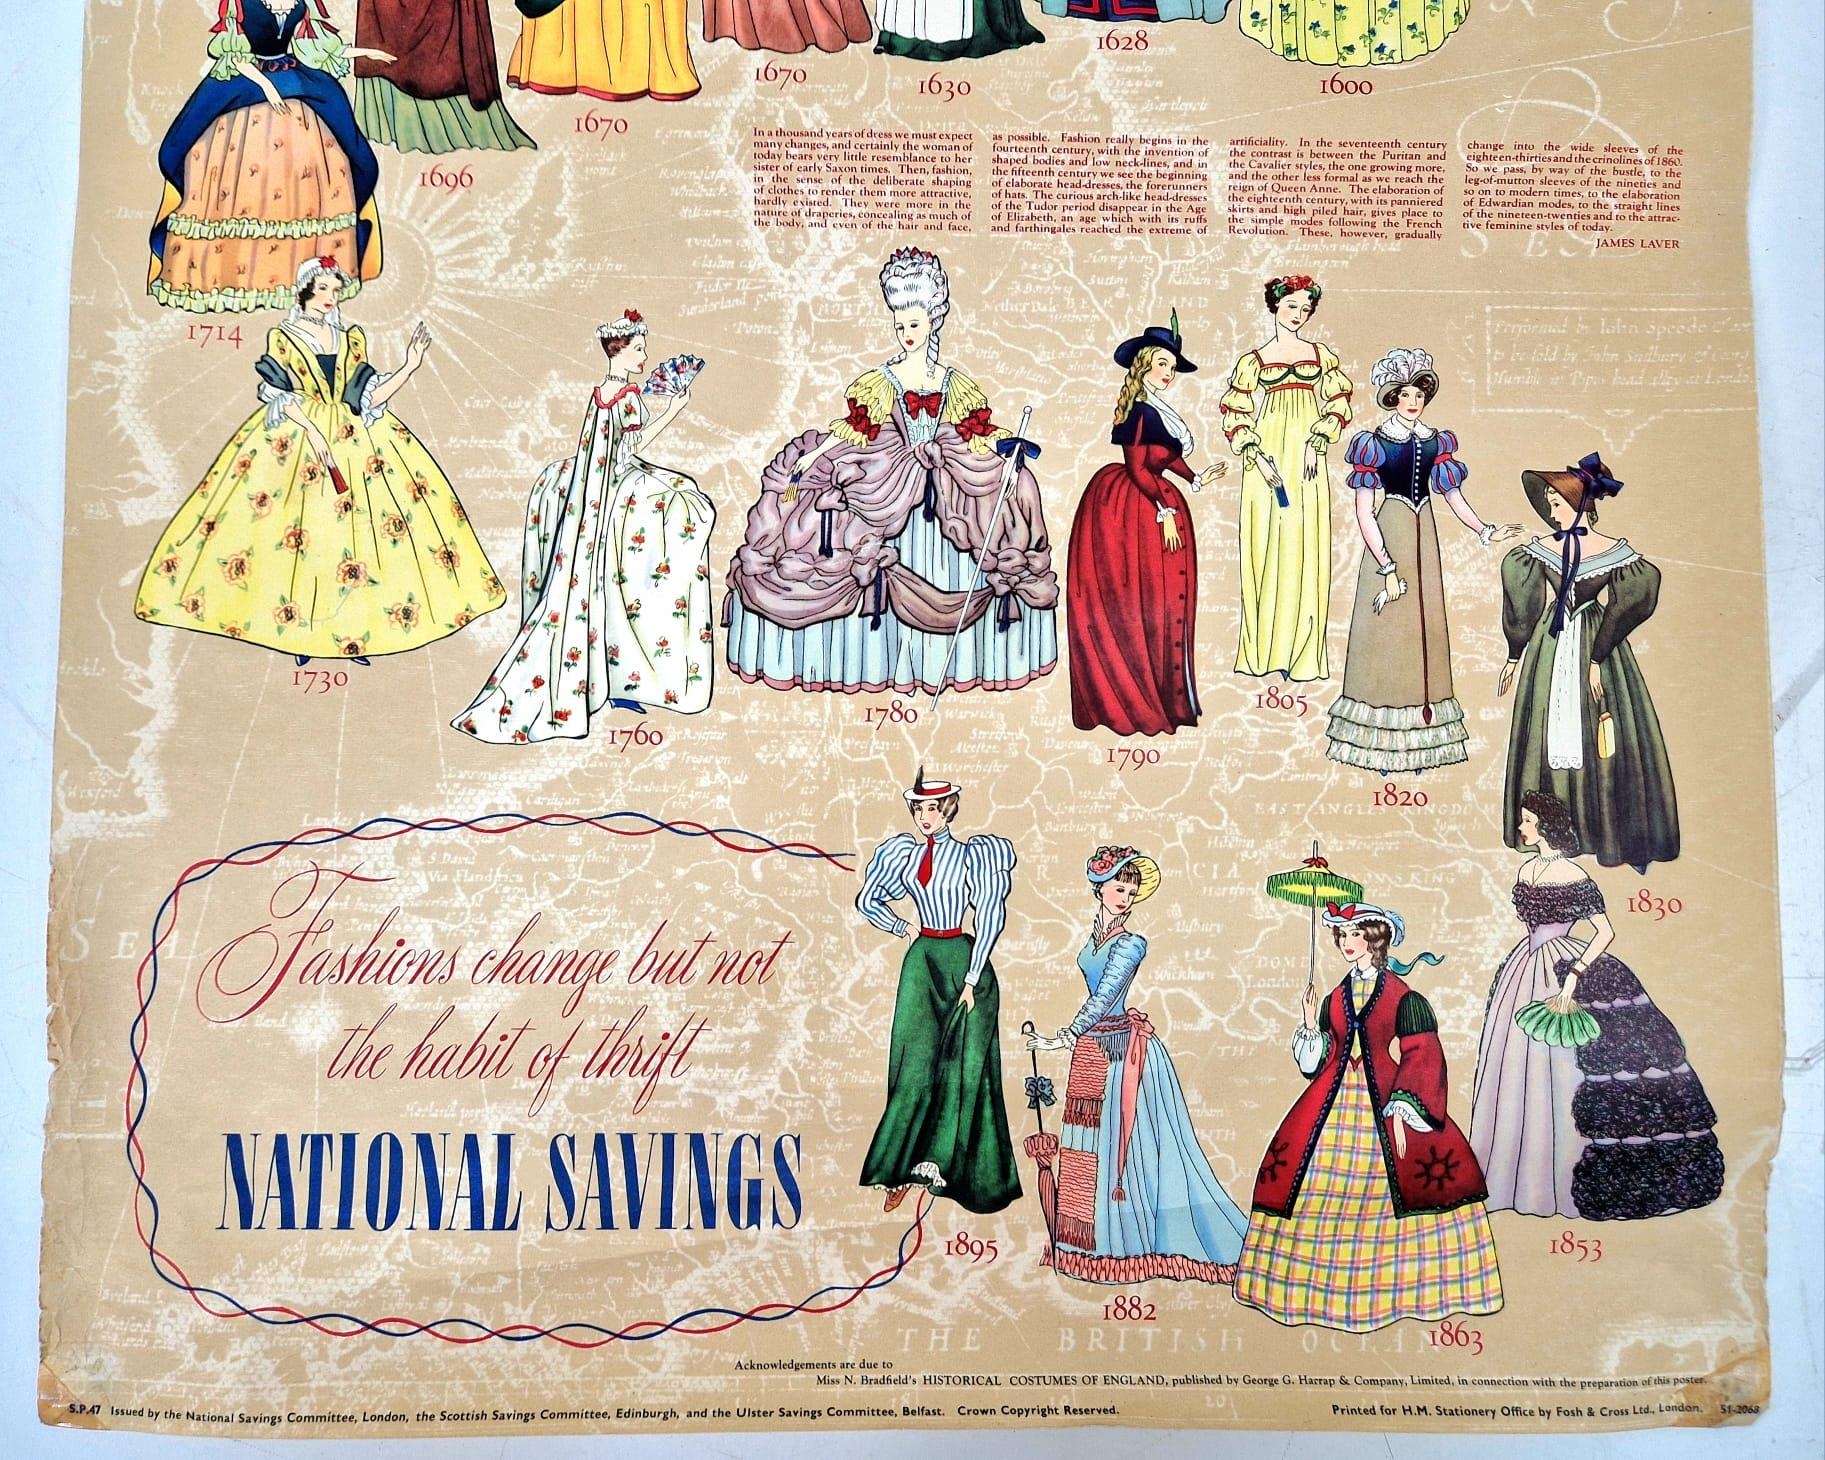 A Vintage Original 1948 National Savings Poster Illustrating Ladies Fashion through the Ages. 75 x - Image 3 of 6